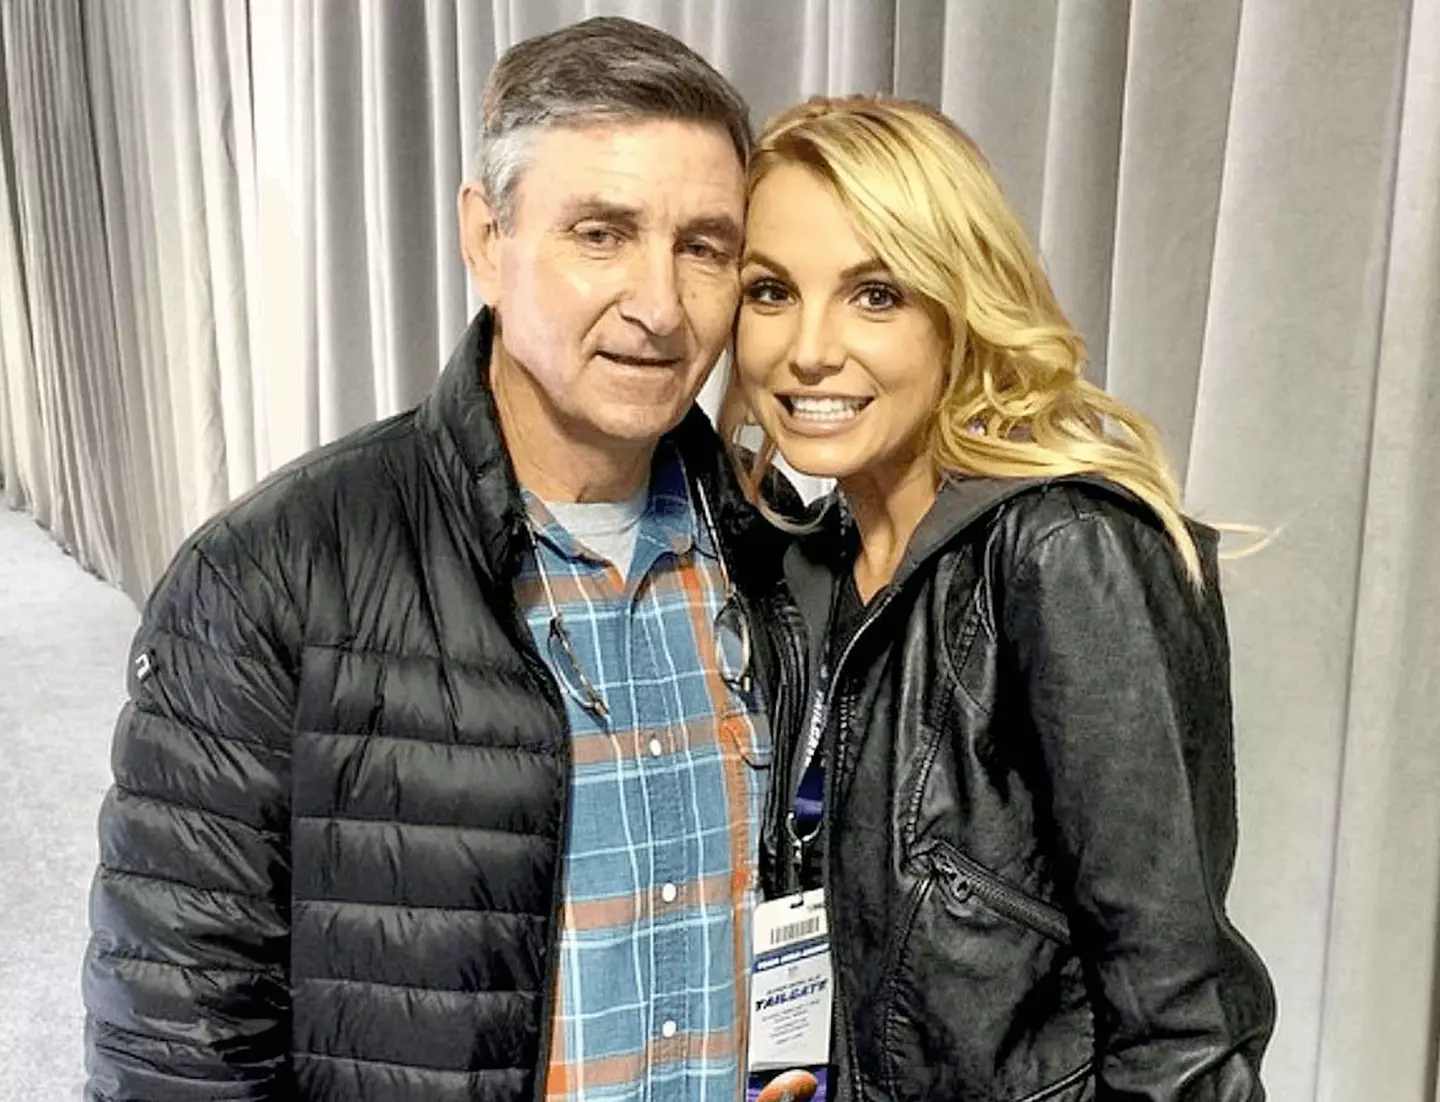 Britney's dad Jamie used to be in support of the conservatorship (